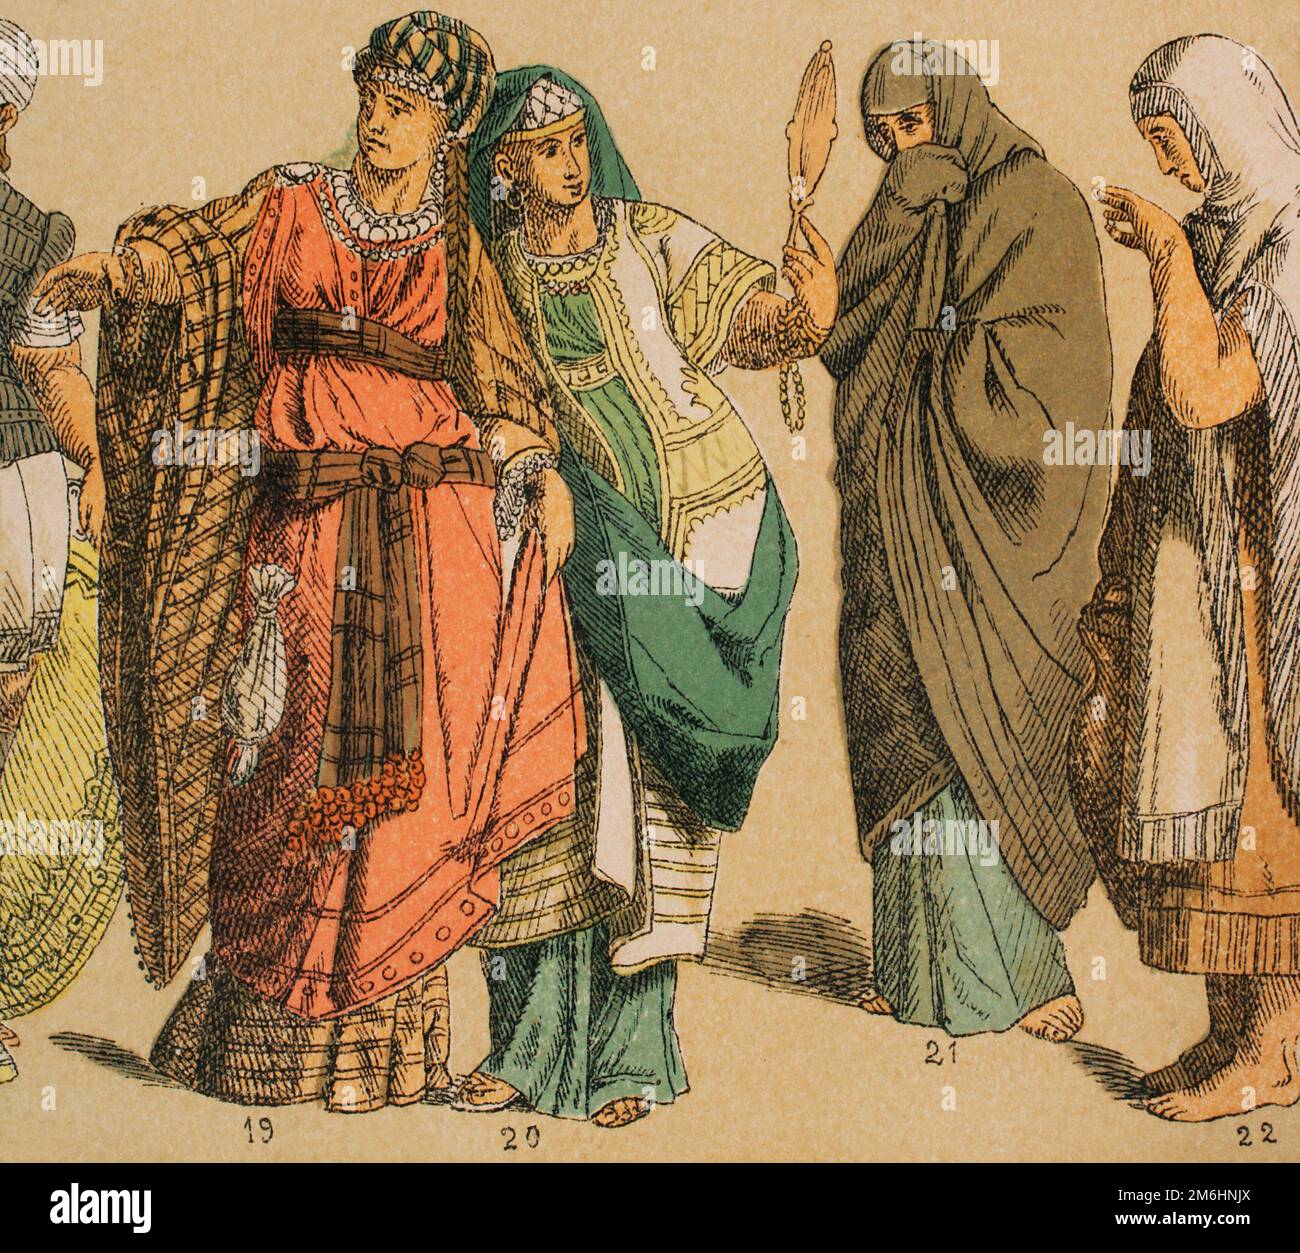 Hebrews. From left to right; 19-20: ladies clothing, 21: Hebrew woman in street clothes, 22: Assyrian-Hebrew mixed costume. Chromolithography. 'Historia Universal' (Universal History), by Cesar Cantu. Volume I, 1881. Stock Photo